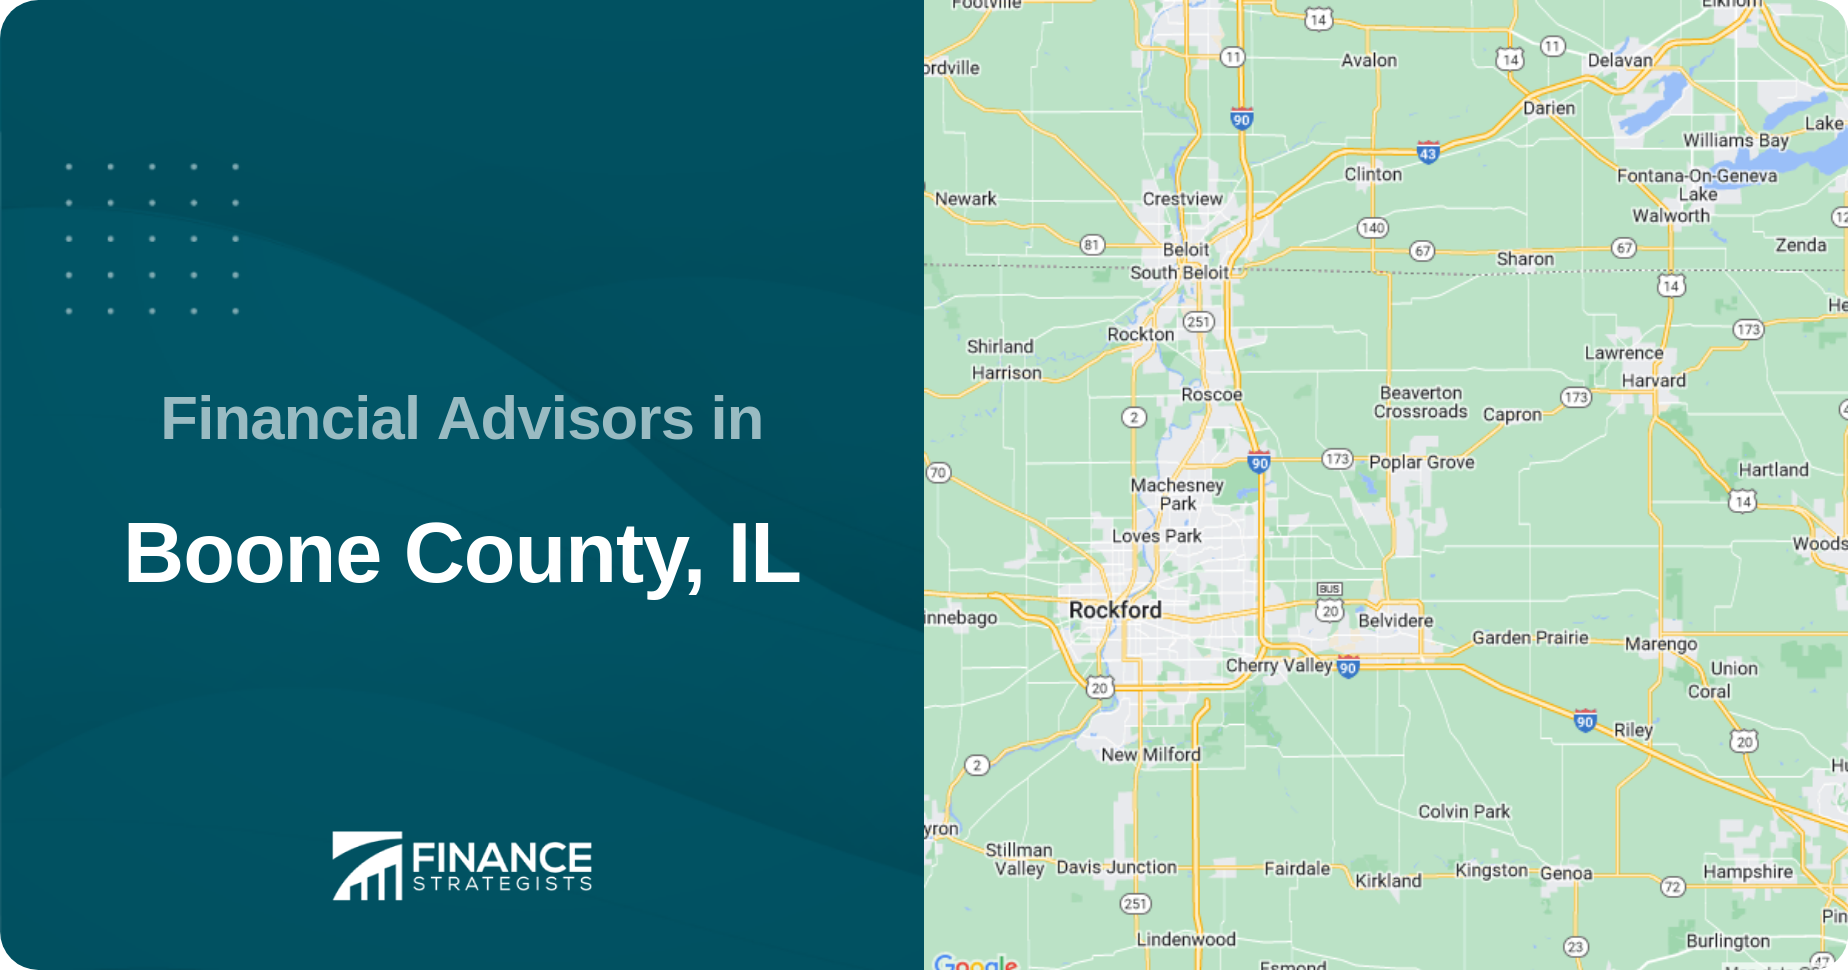 Financial Advisors in Boone County, IL